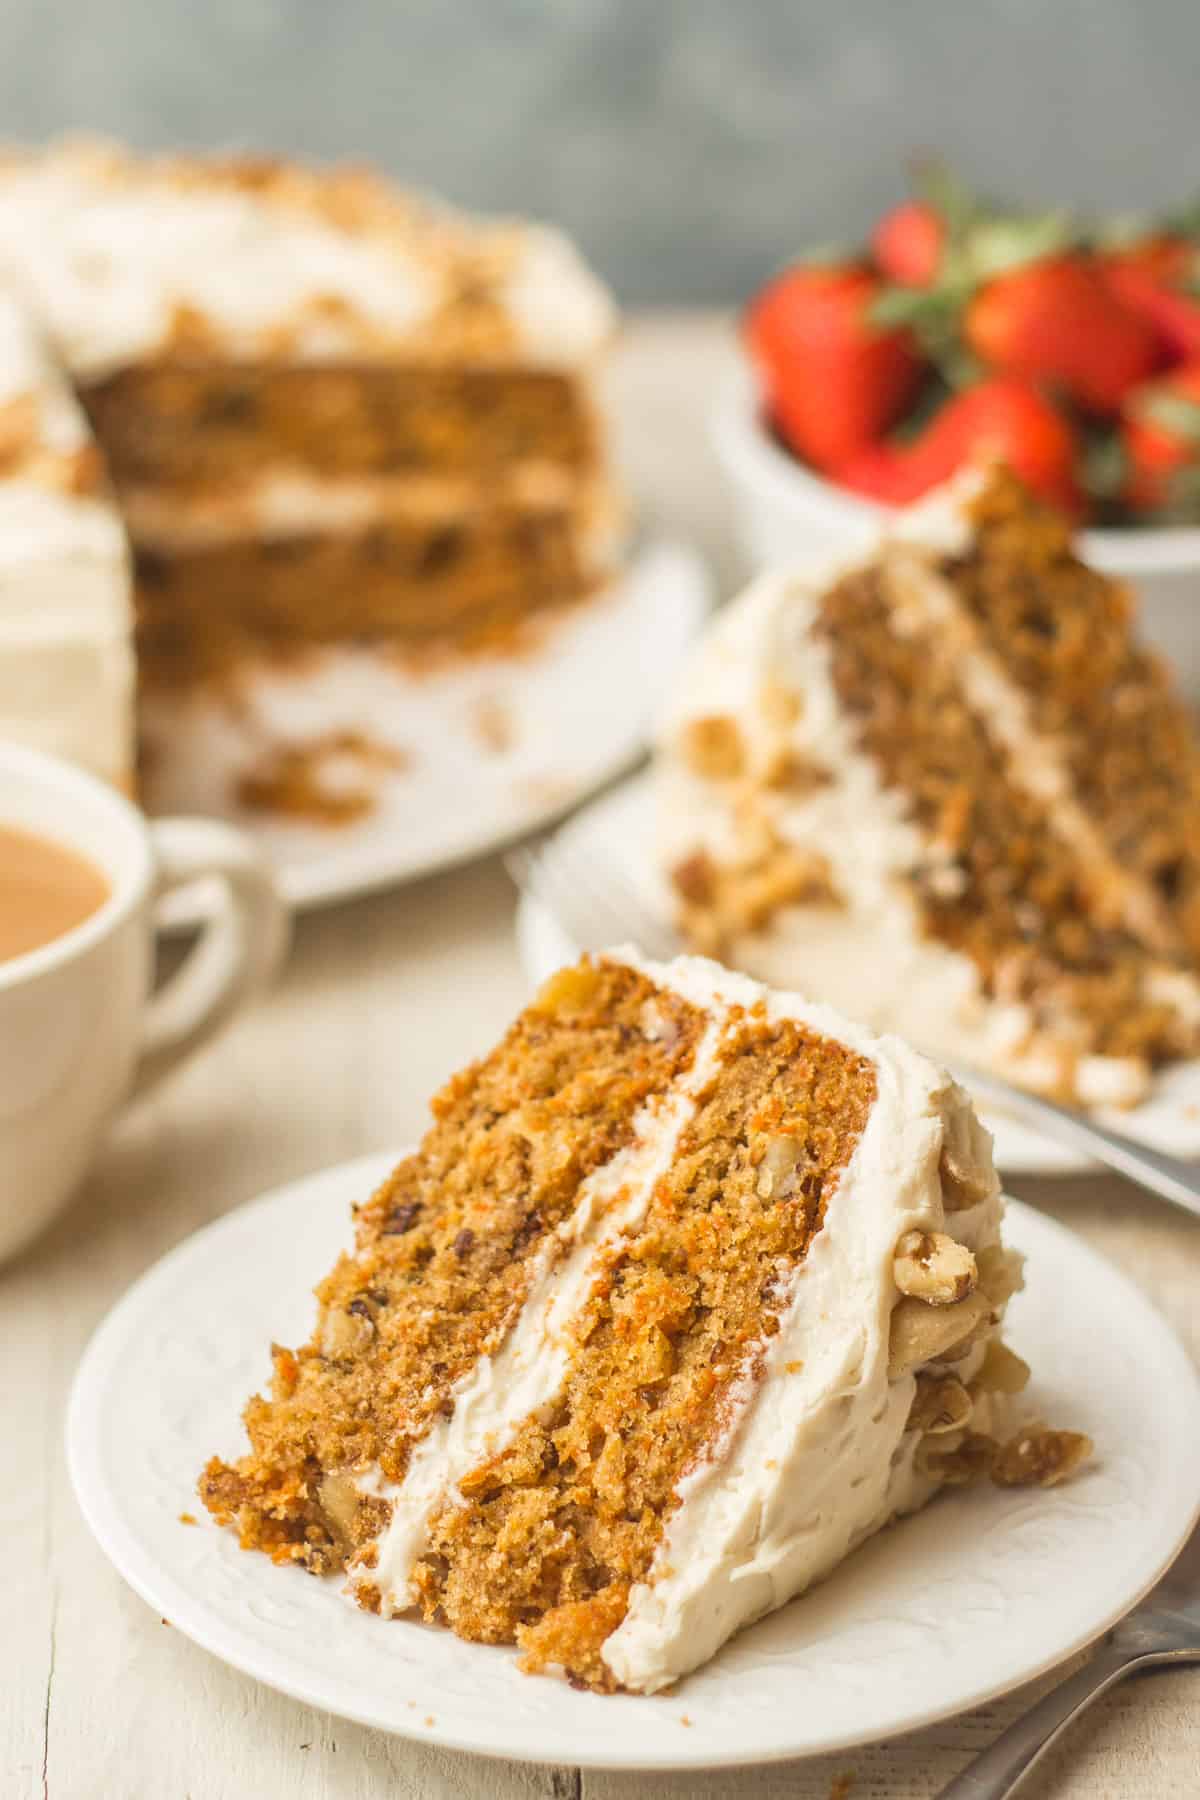 Slice of Vegan Carrot Cake on a Plate with Additional Slices, Coffee Cup and Strawberries in the Background